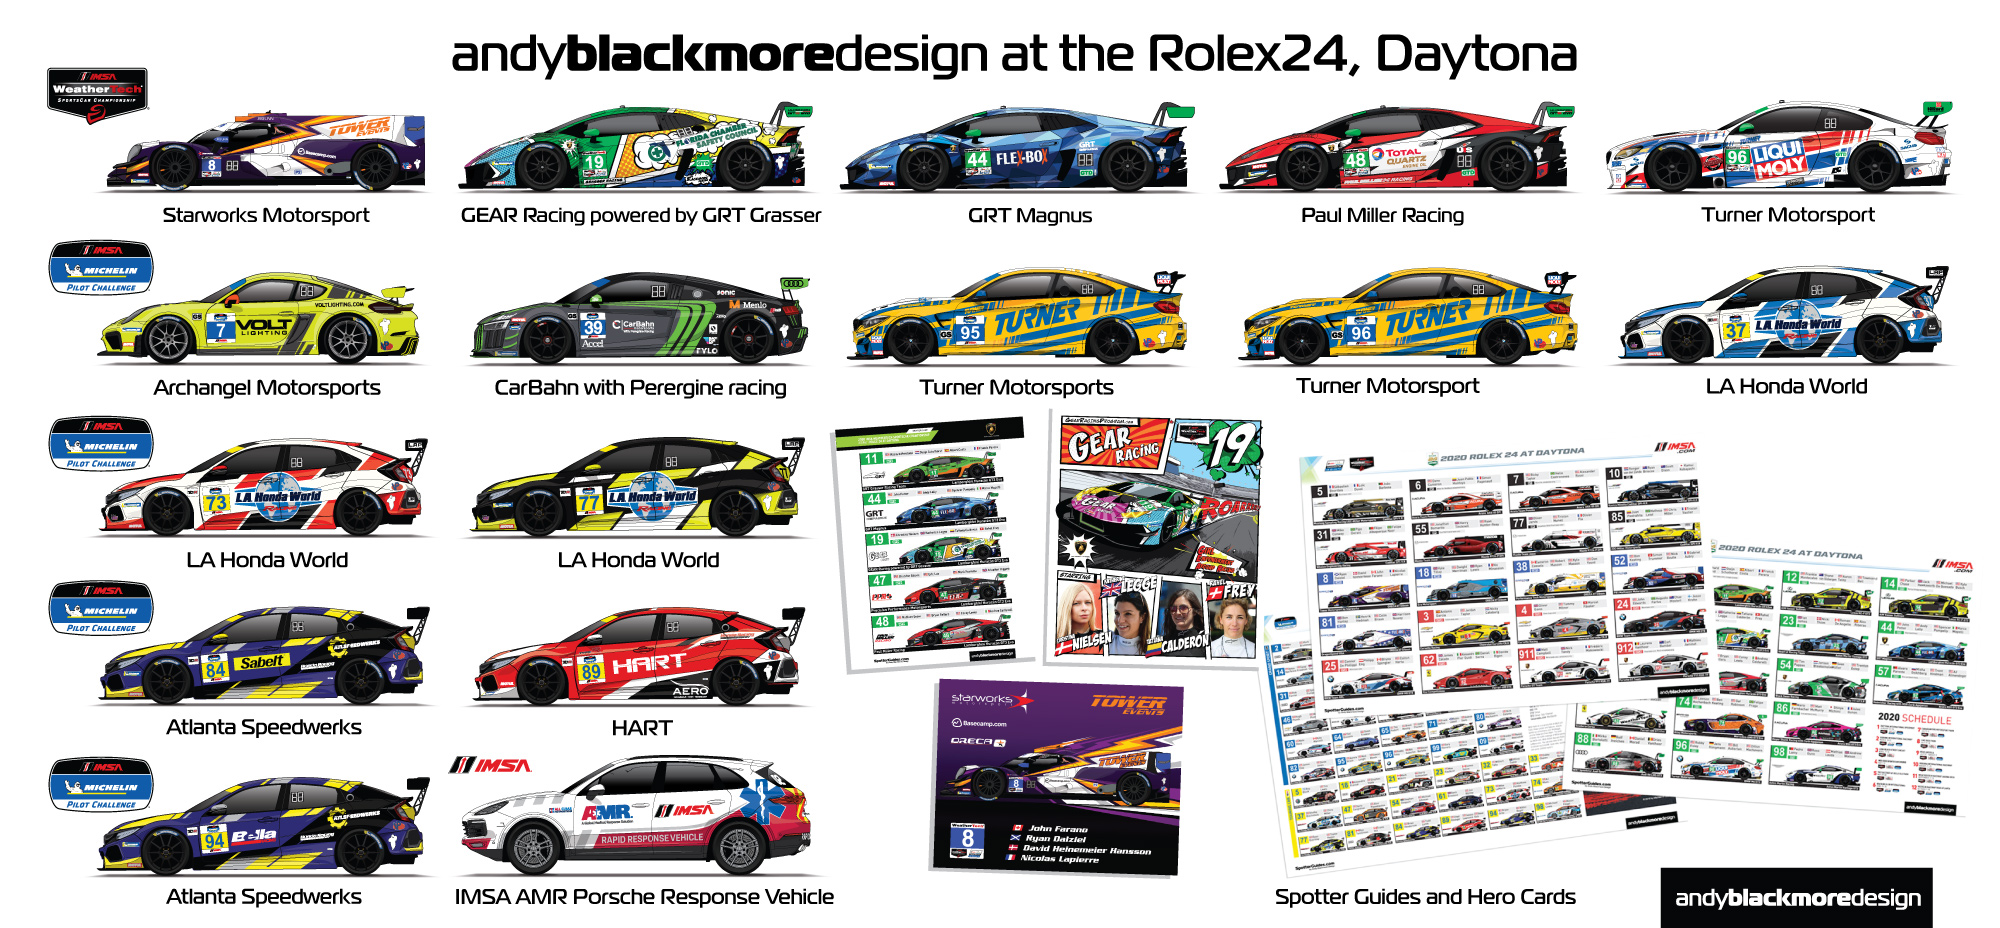 Andy Blackmore Design at 2020 Rolex 24 